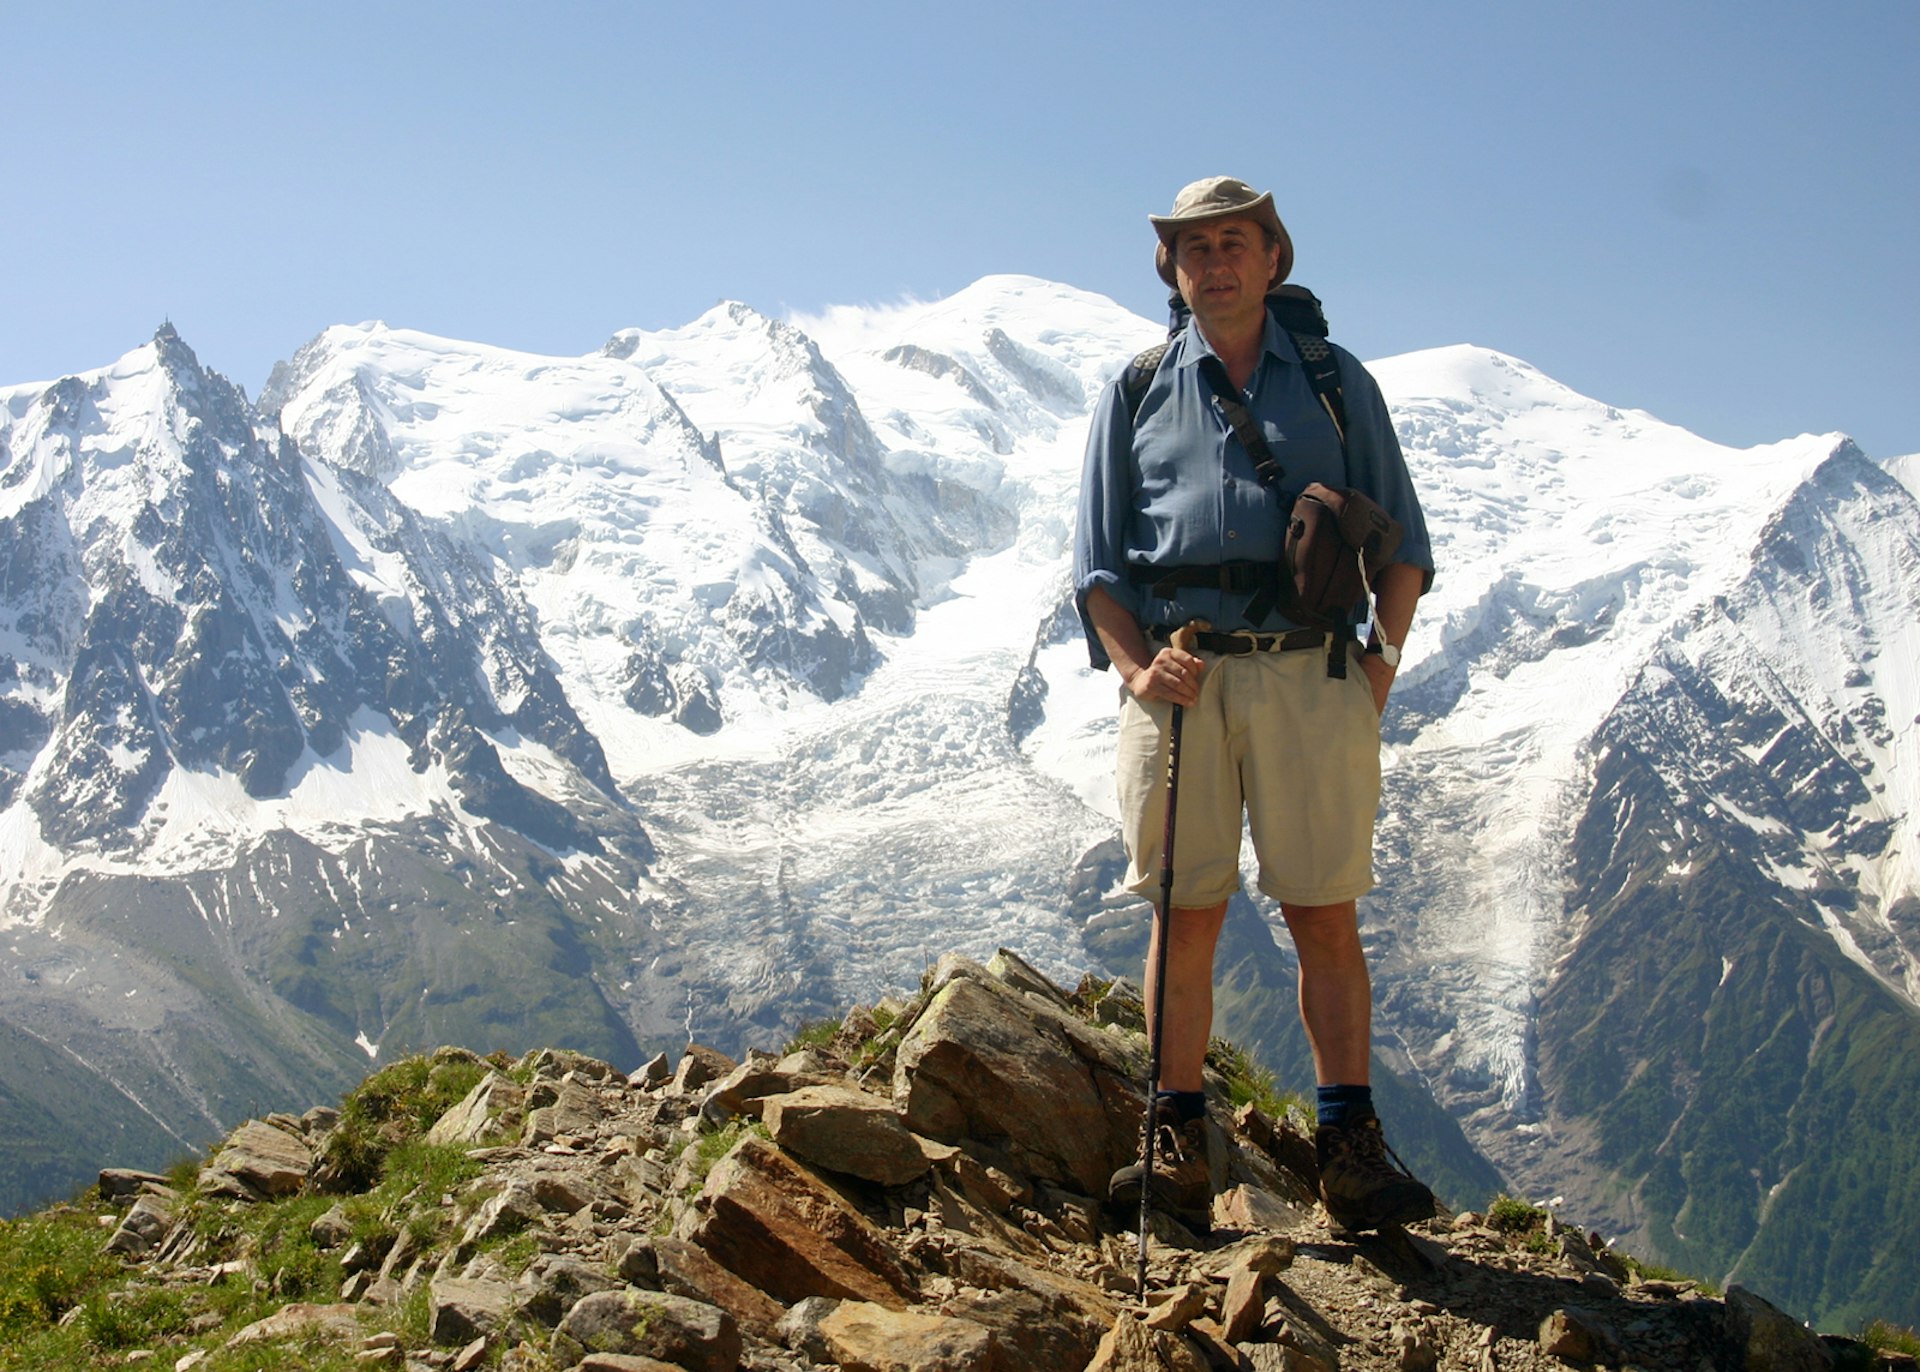 William exploring France's Aiguilles Rouges with Mt Blanc in the background © William Mackesy